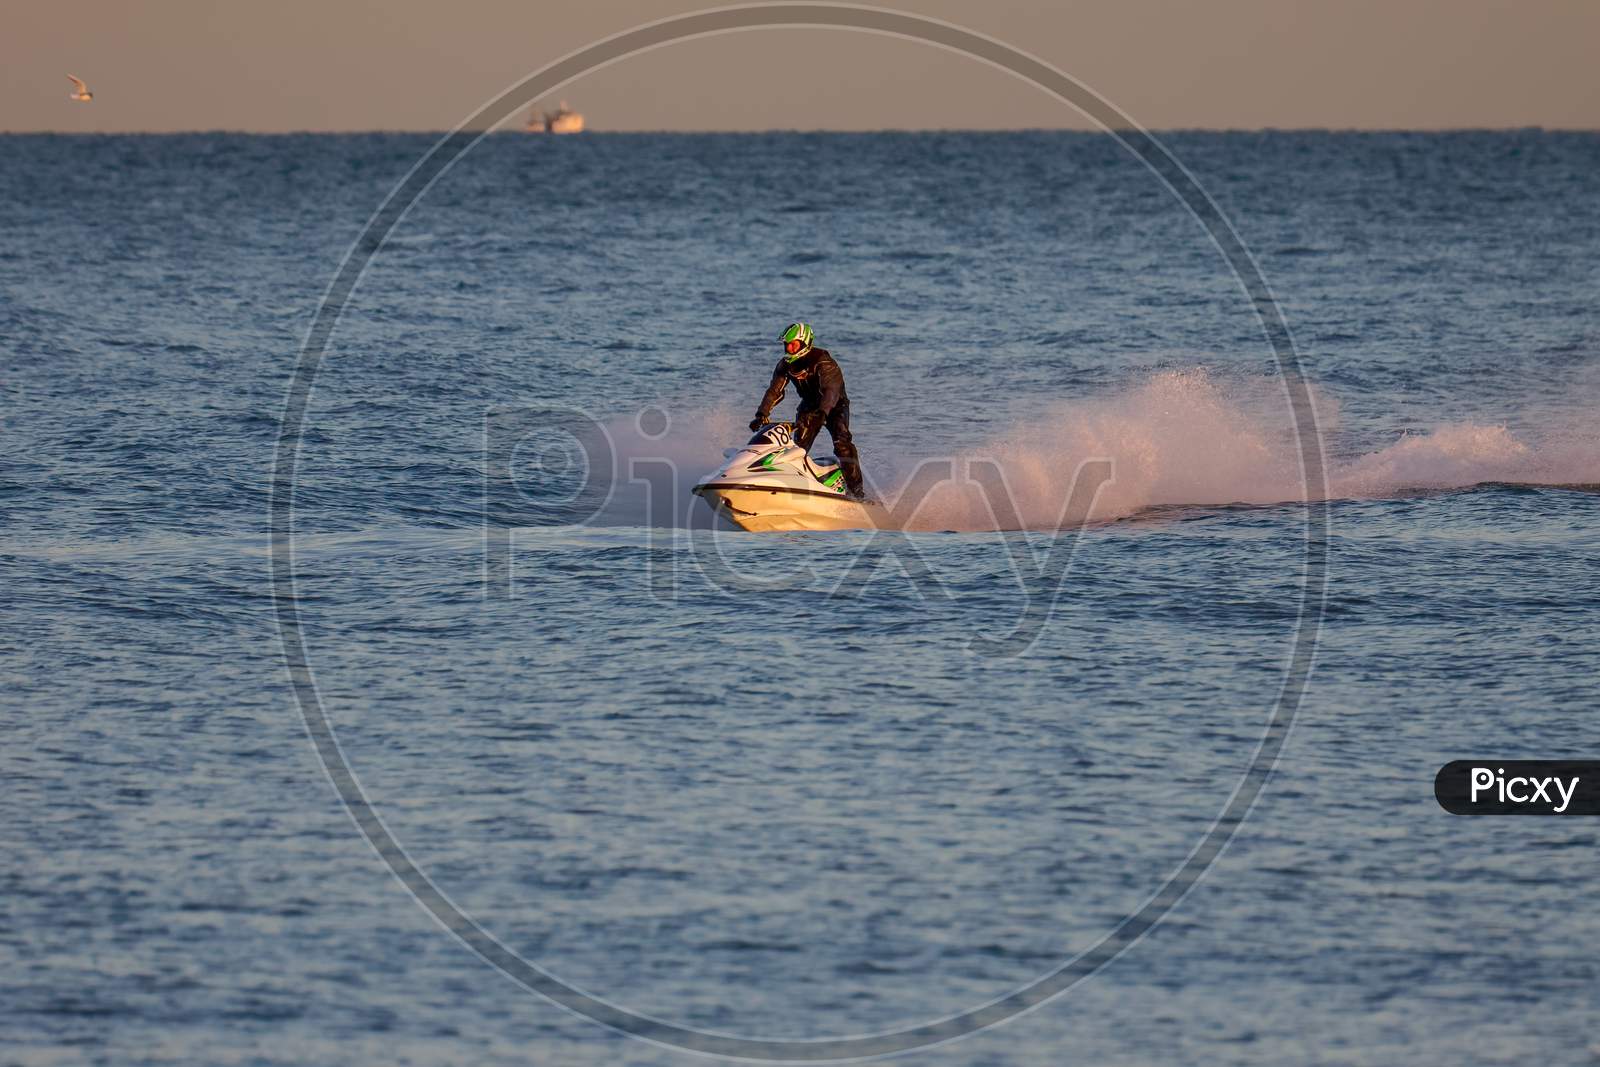 Dungeness, Kent/Uk - December 17 : Man Riding A Jet Ski Off Dungeness Beach In Kent On December 17, 2008. One Unidentified Person